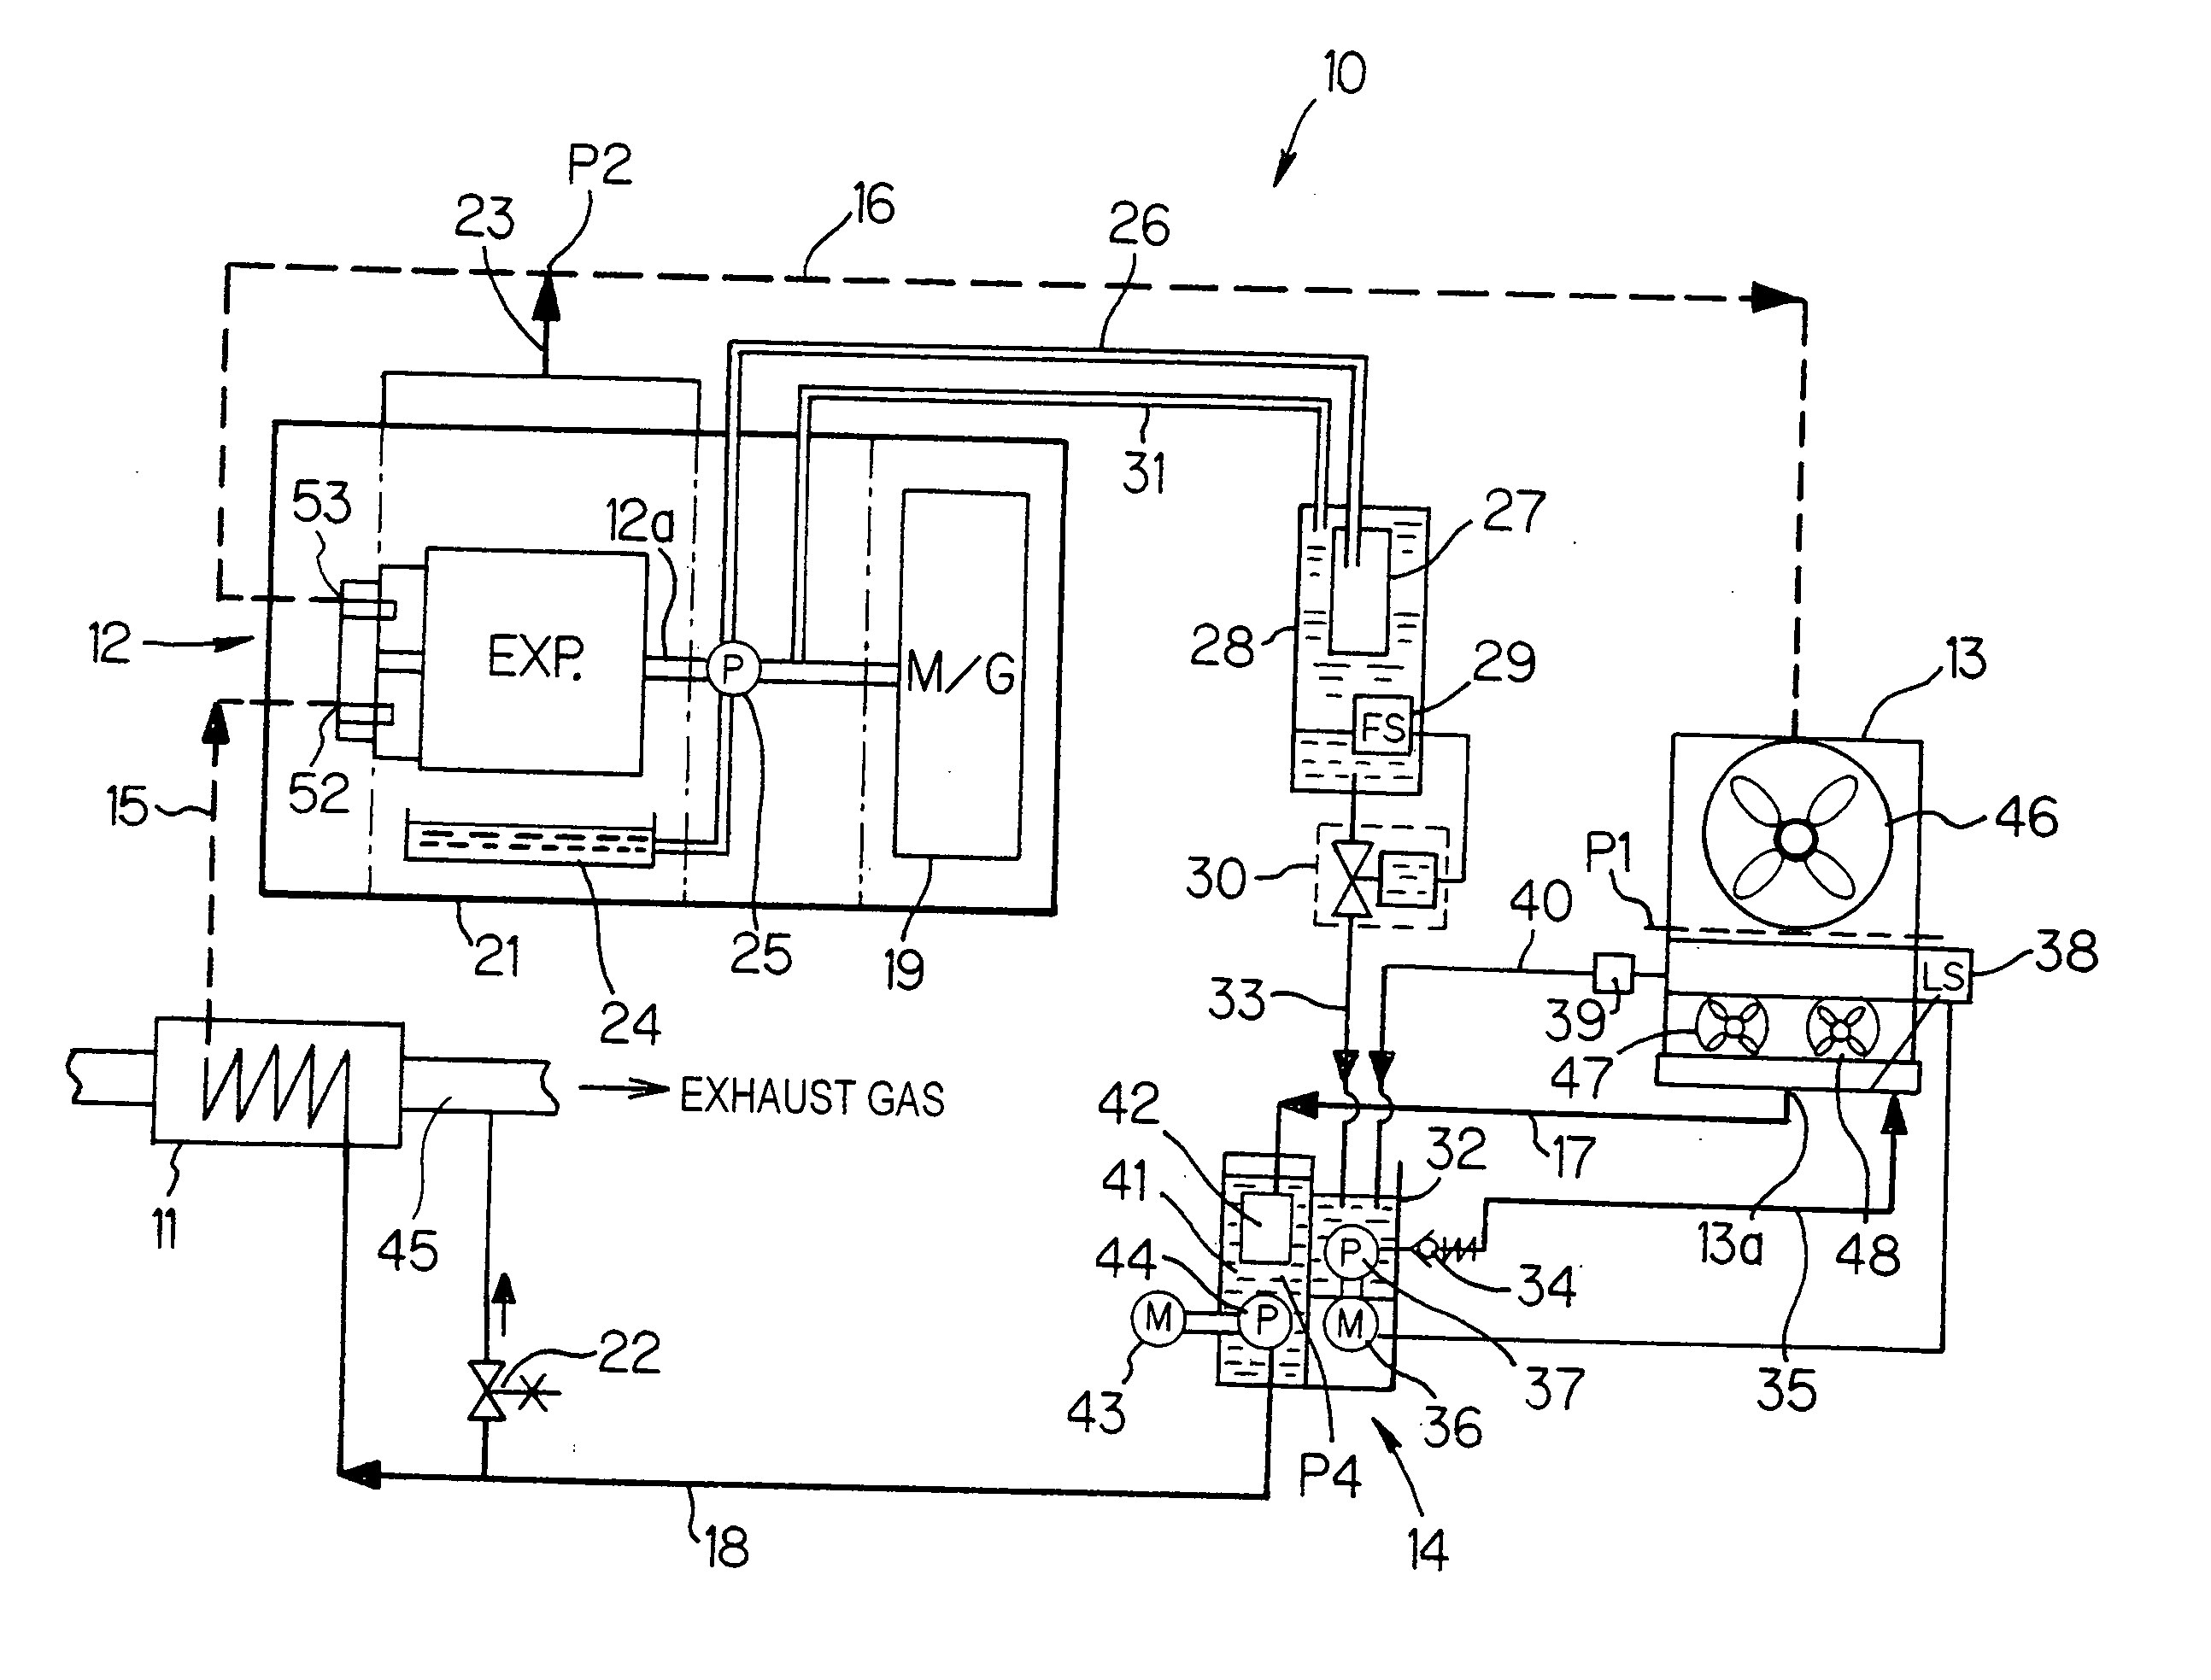 Cooling control device for condenser